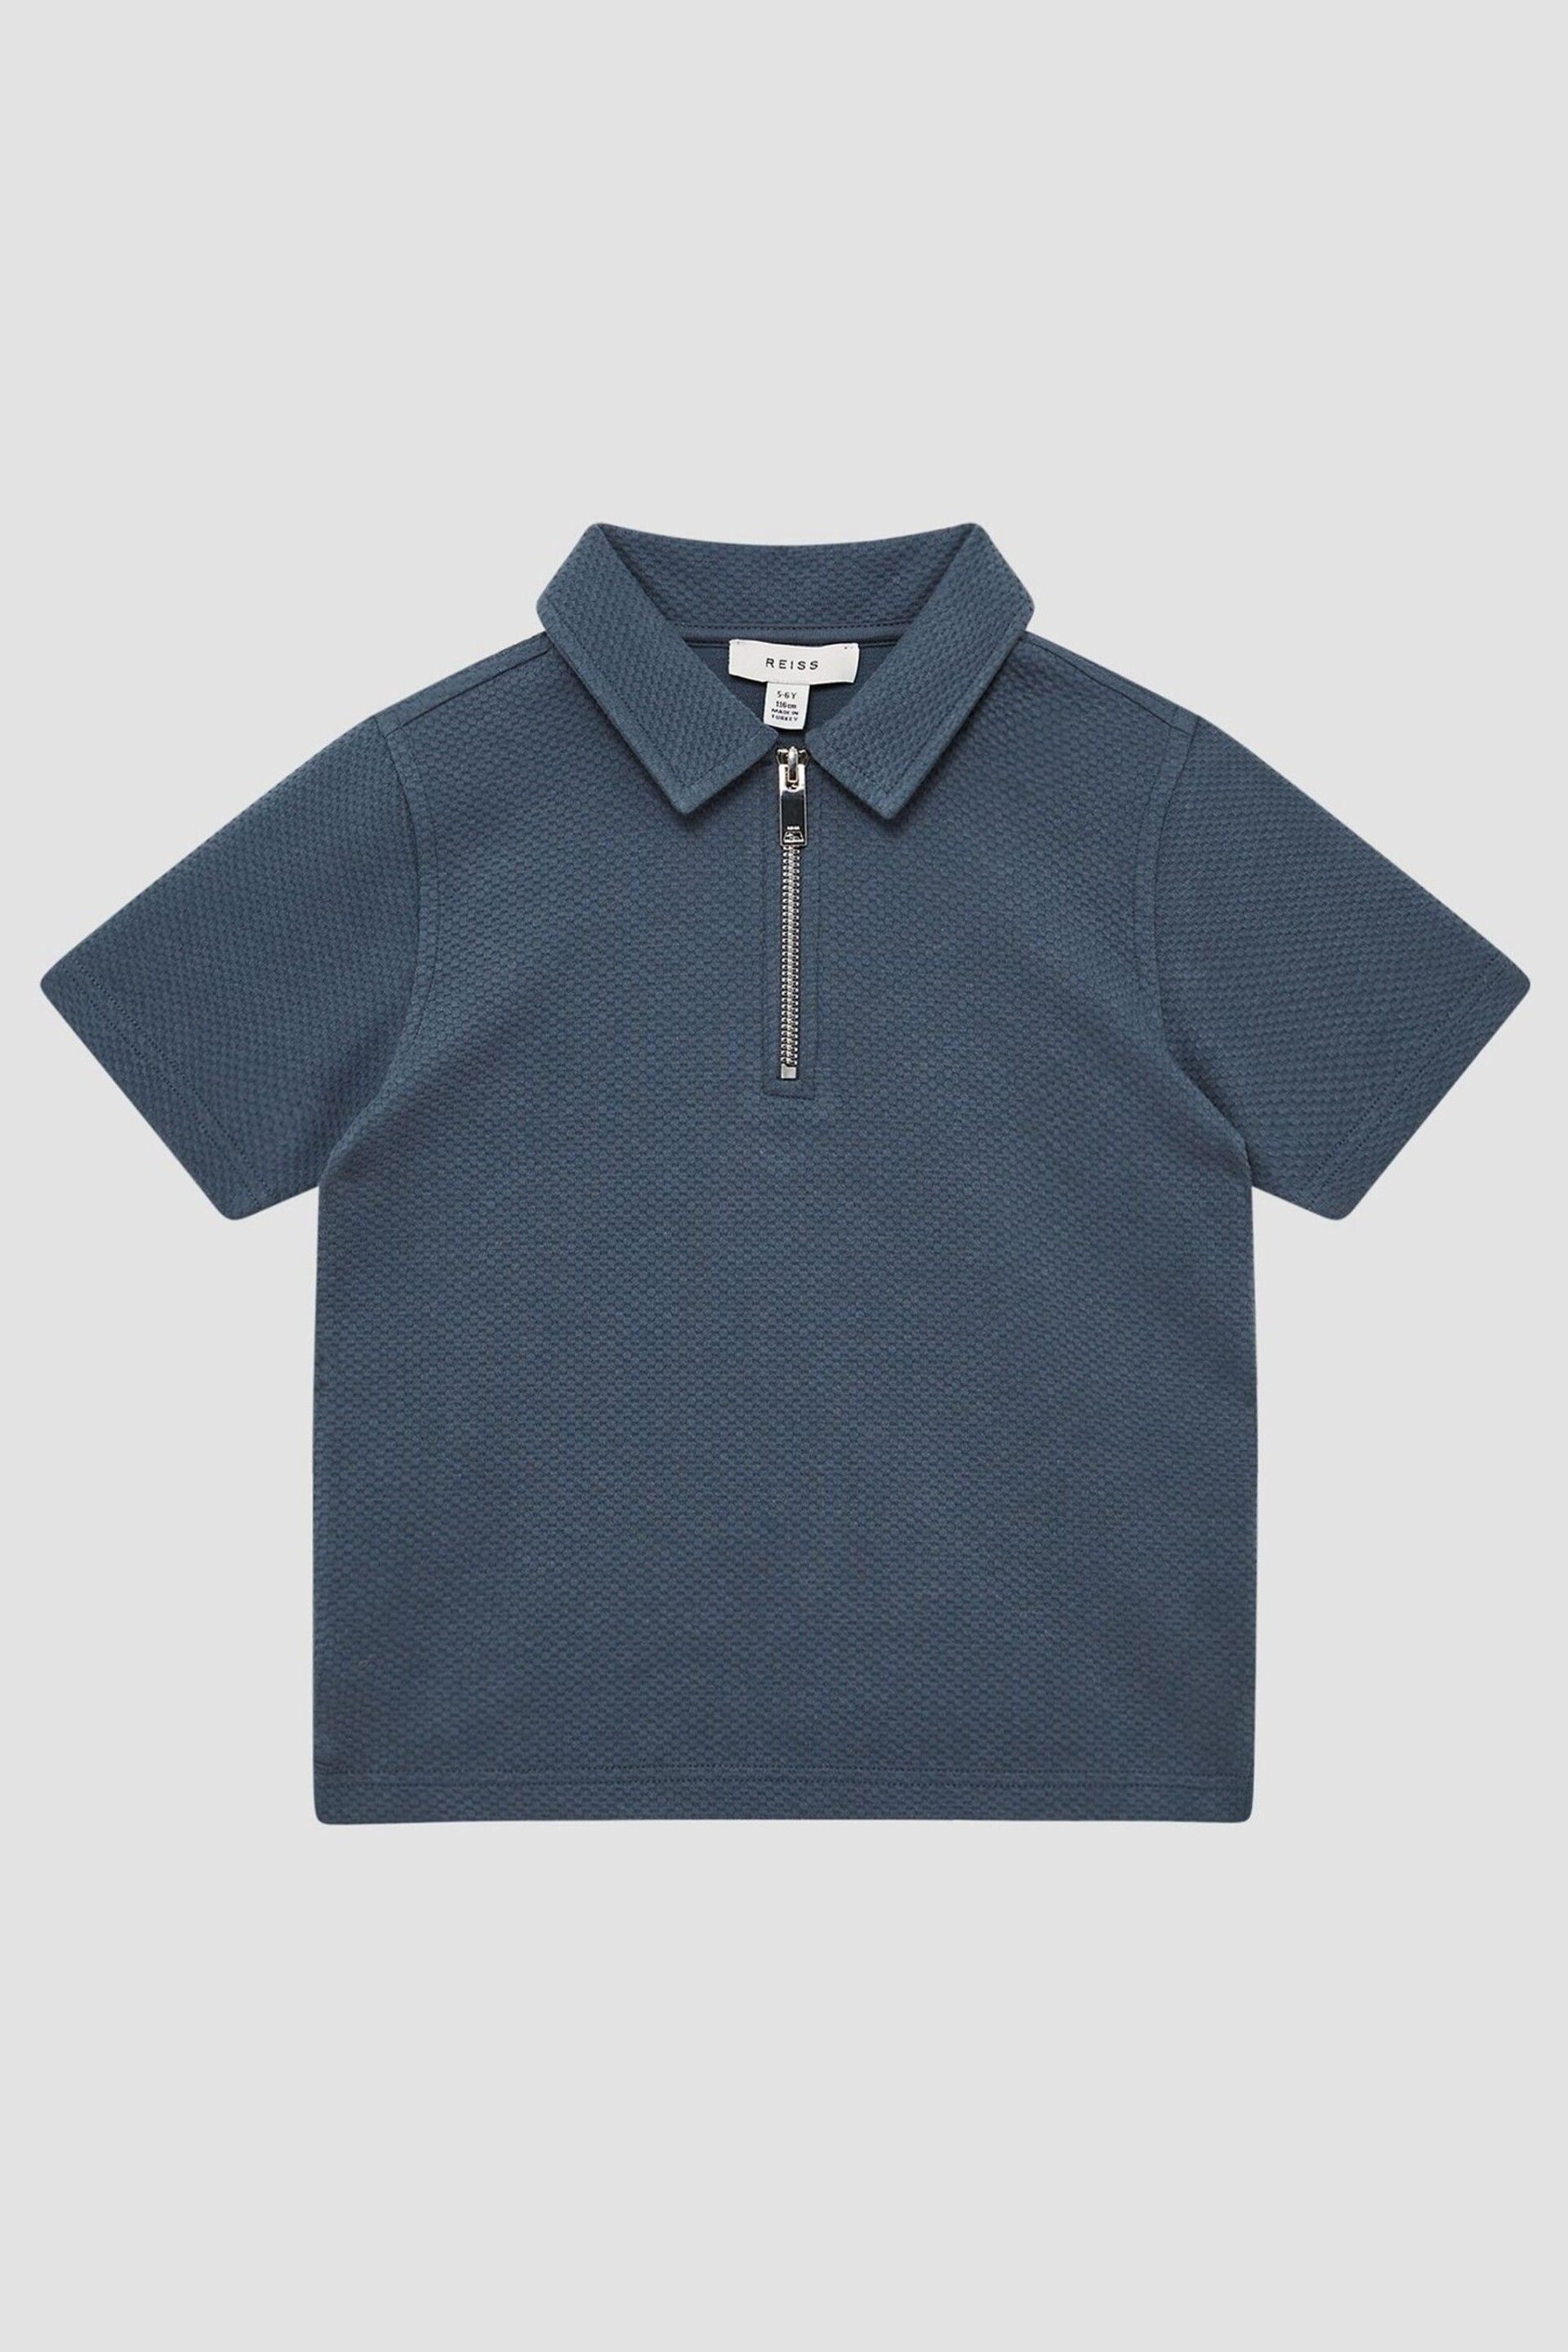 Reiss Royal Blue Creed Junior Slim Fit Textured Half Zip Polo Shirt - Image 2 of 6